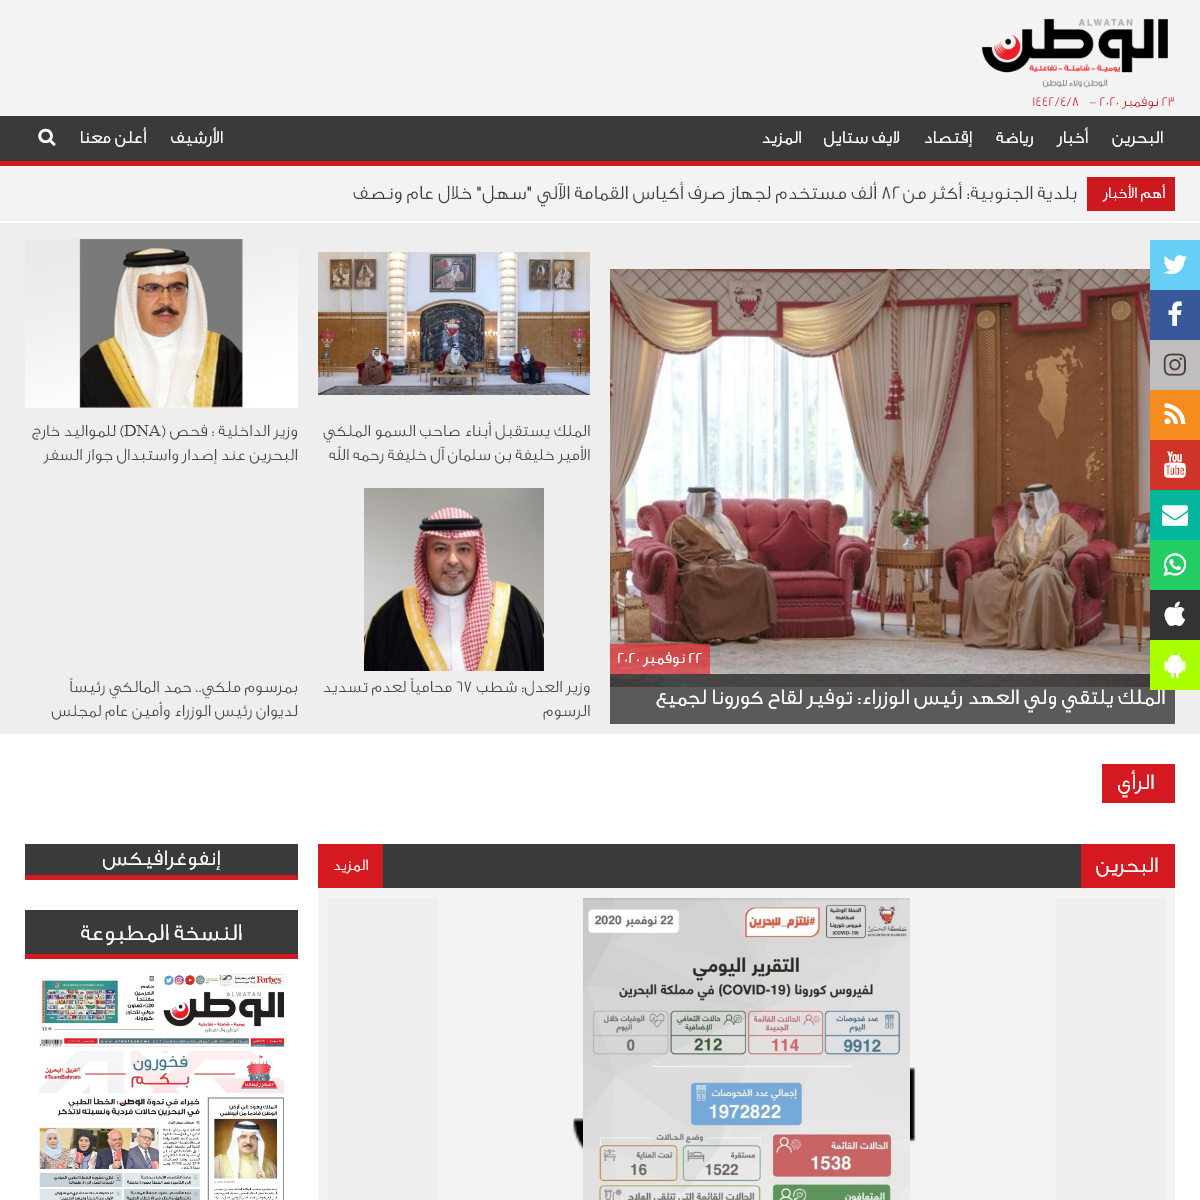 A complete backup of alwatannews.net